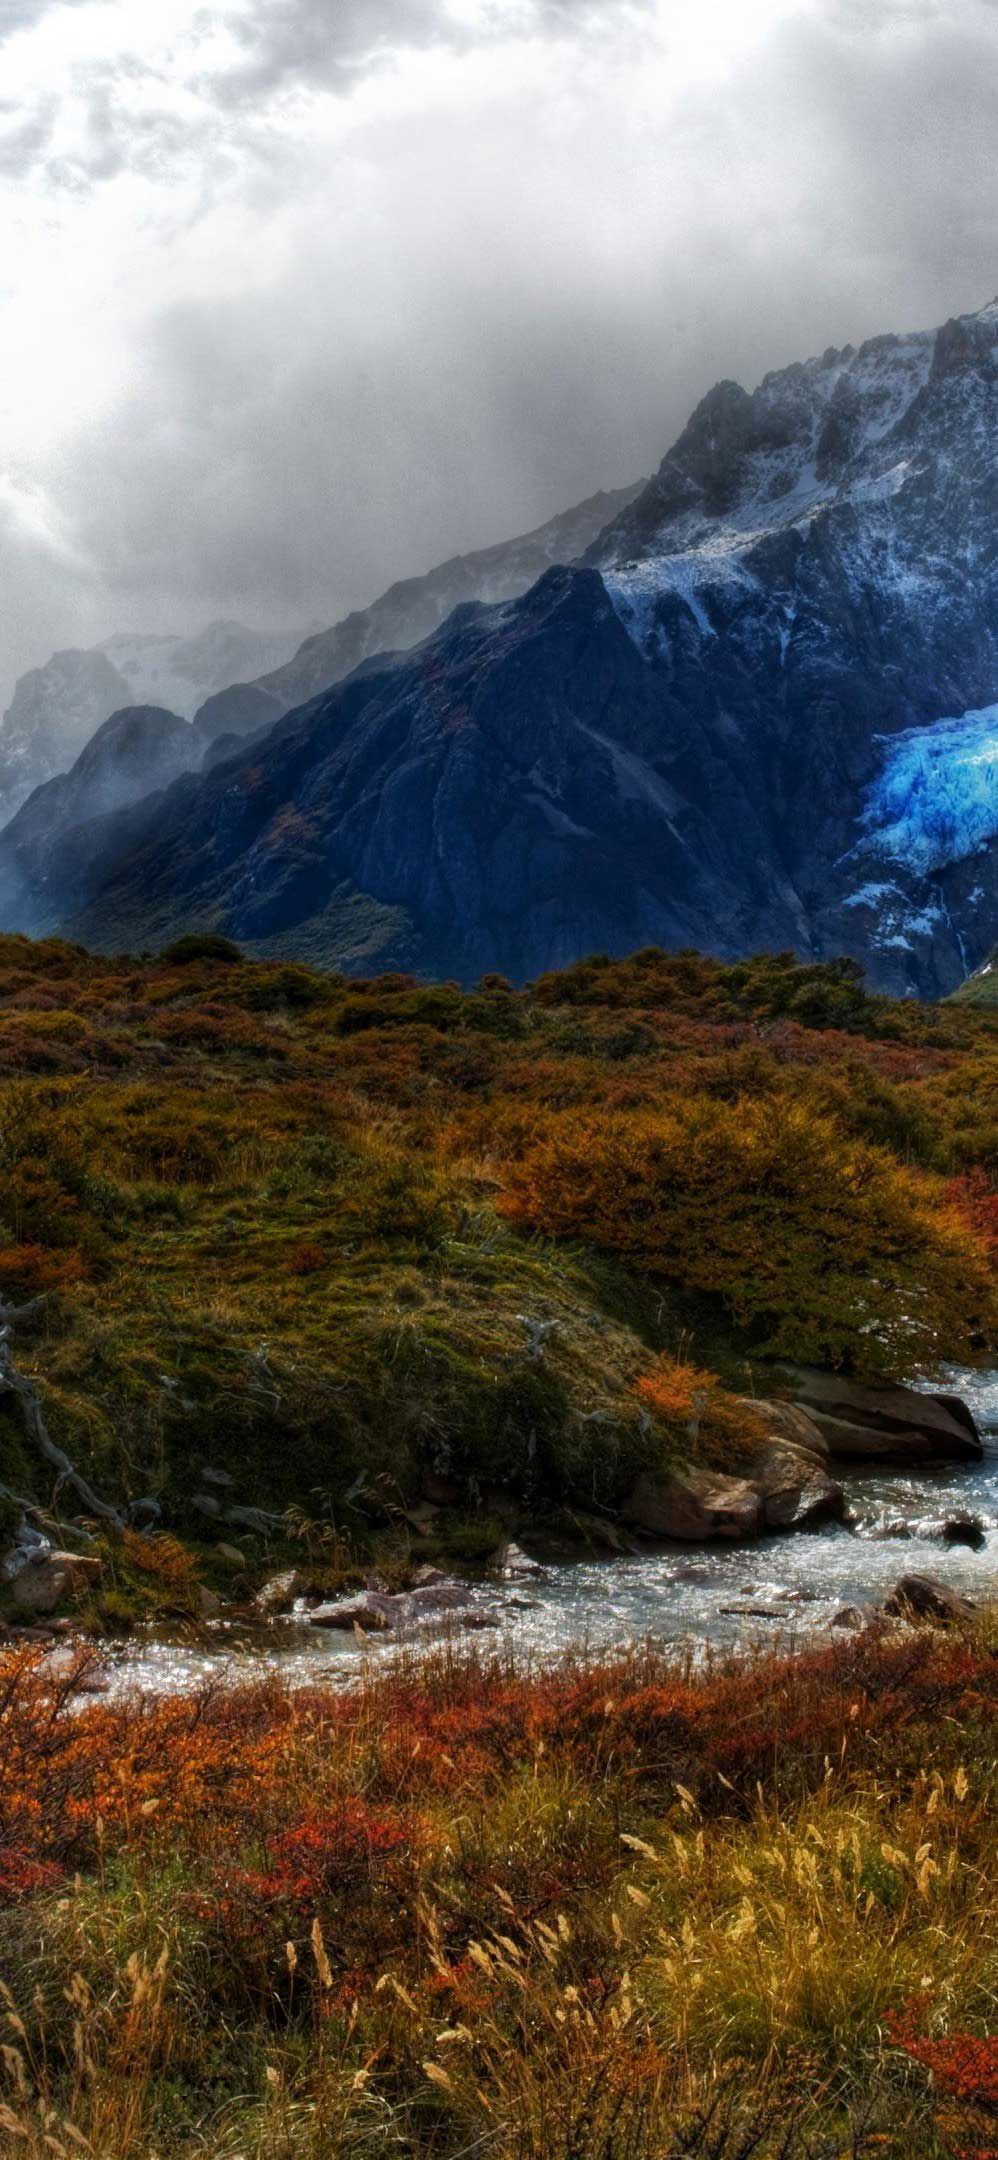 landscape in patagonia wallpaper iPhone Pro Ma Wallpaper. iPhone wallpaper landscape, iPad air wallpaper, Tree wallpaper iphone